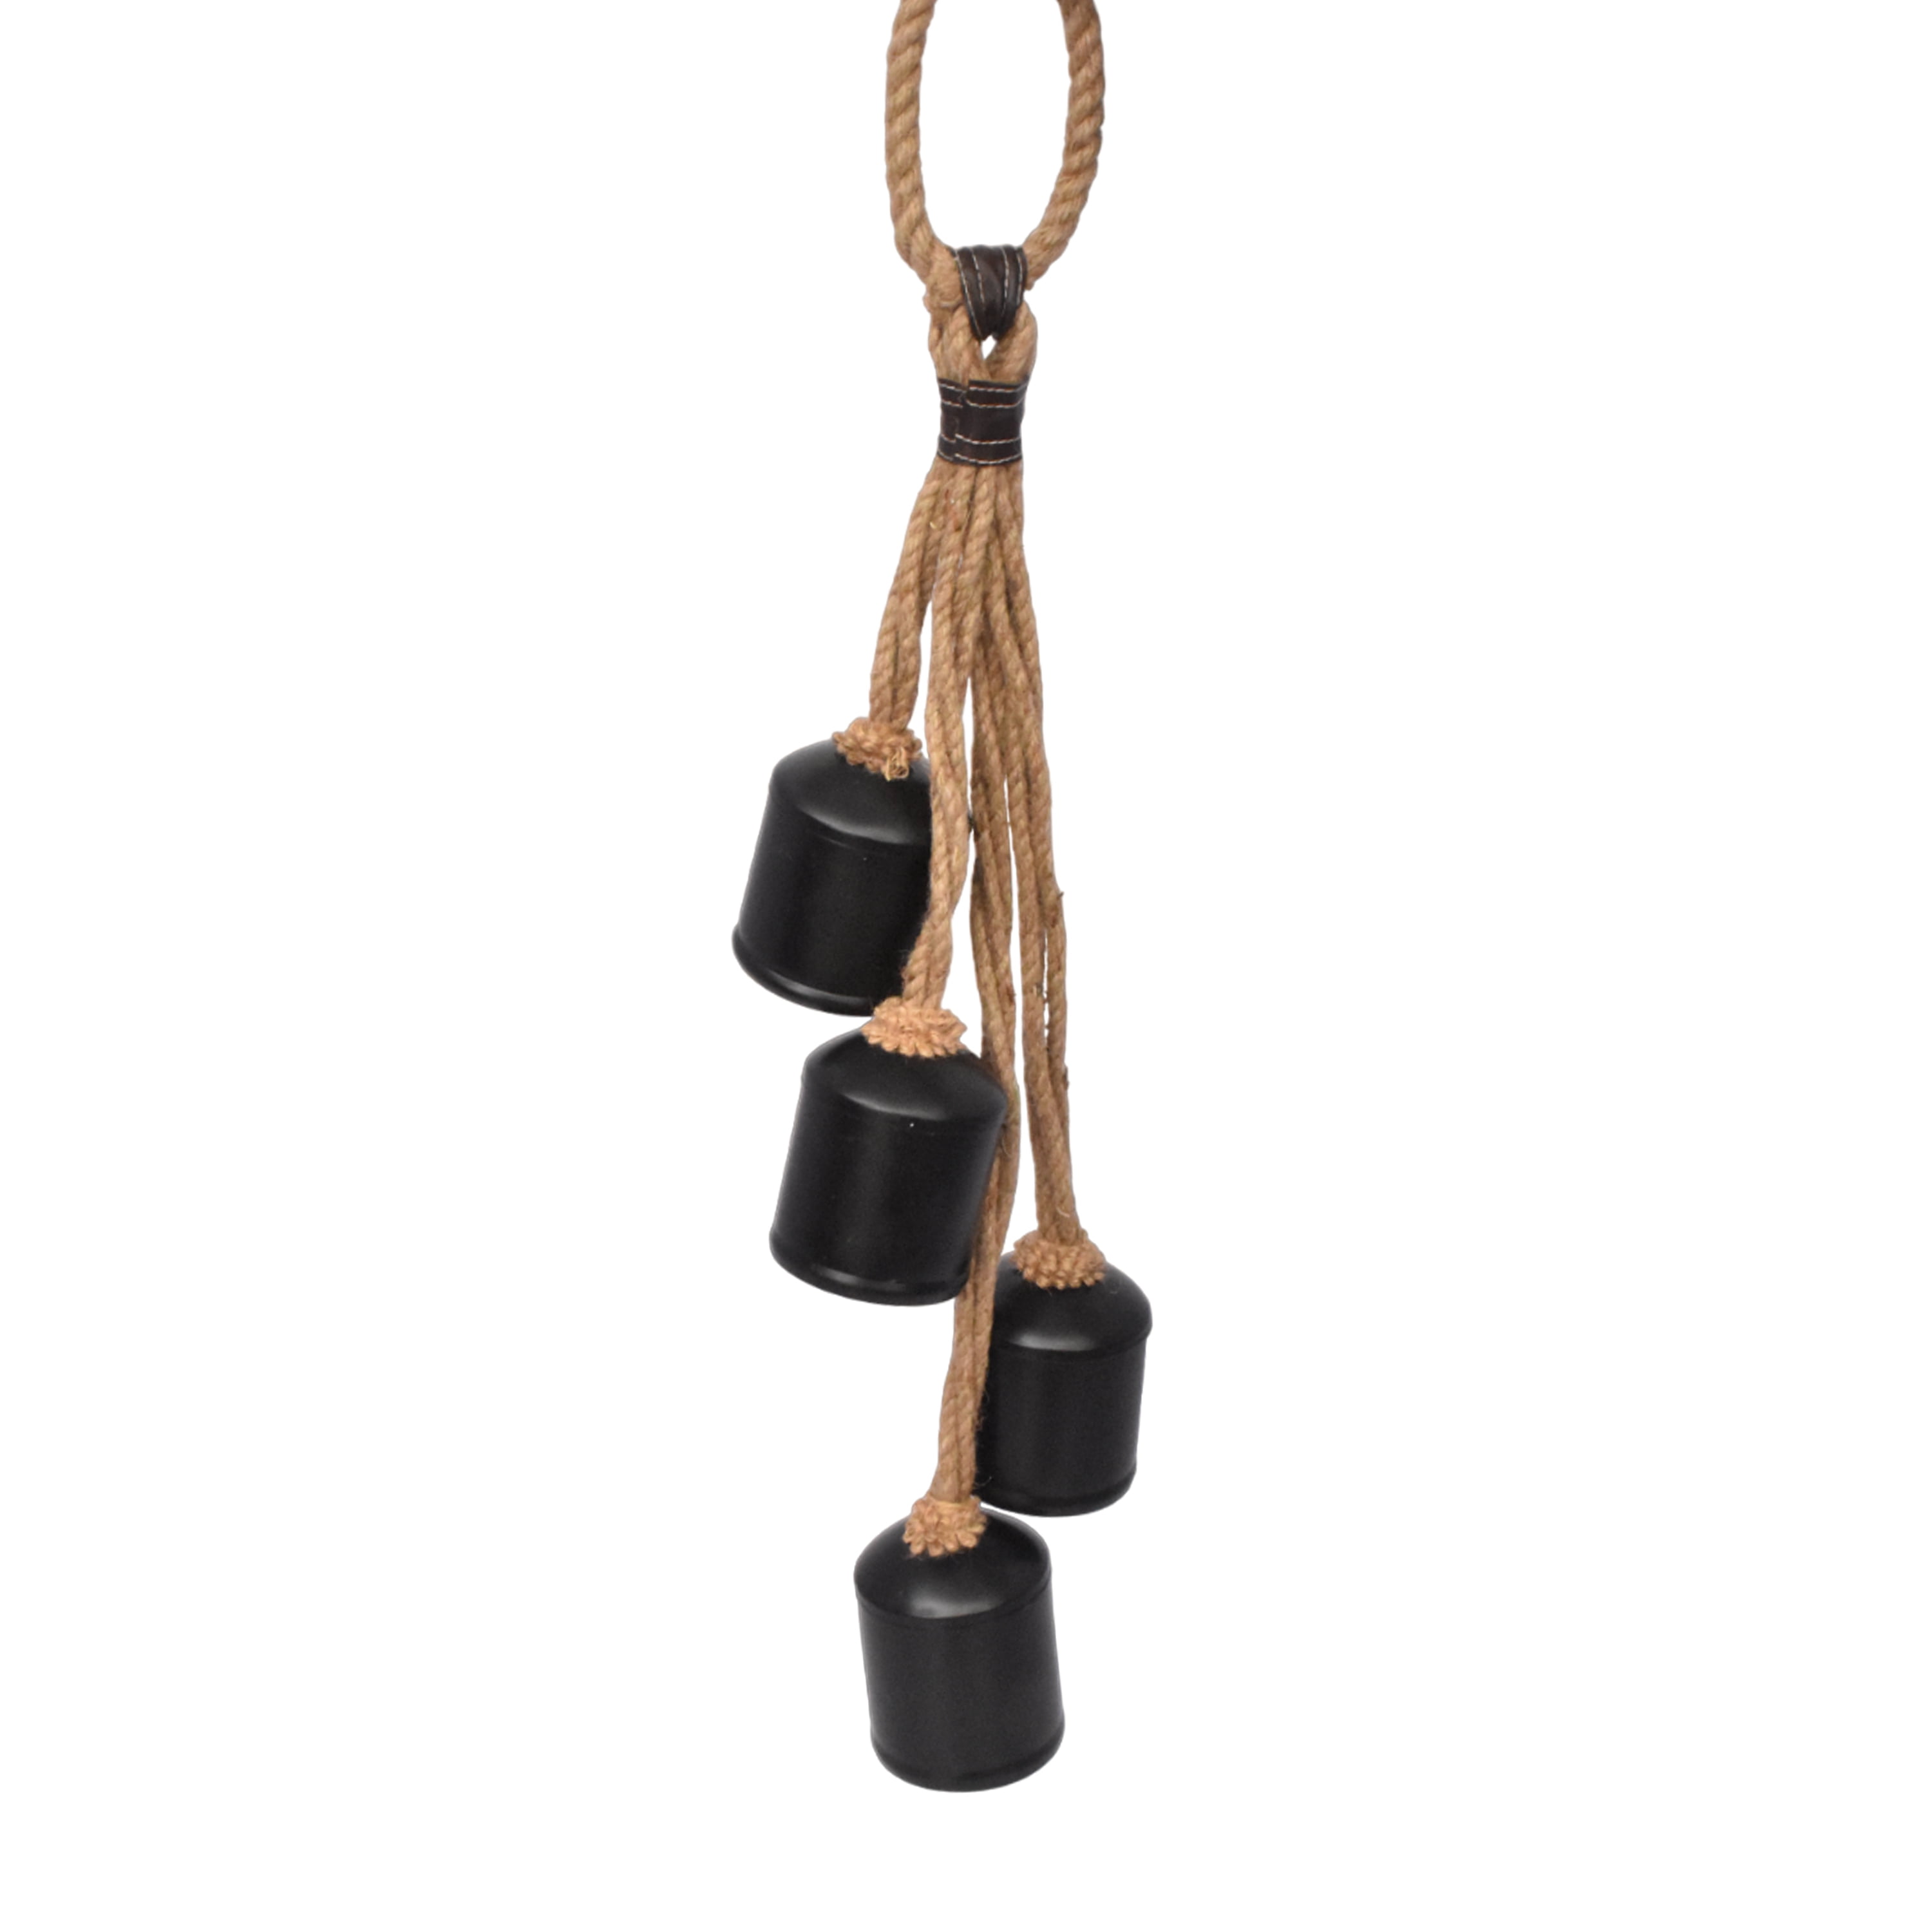 4-Count Metal Hanging Bells Christmas Decoration in Black Finish, 28.75 in,  by Holiday Time